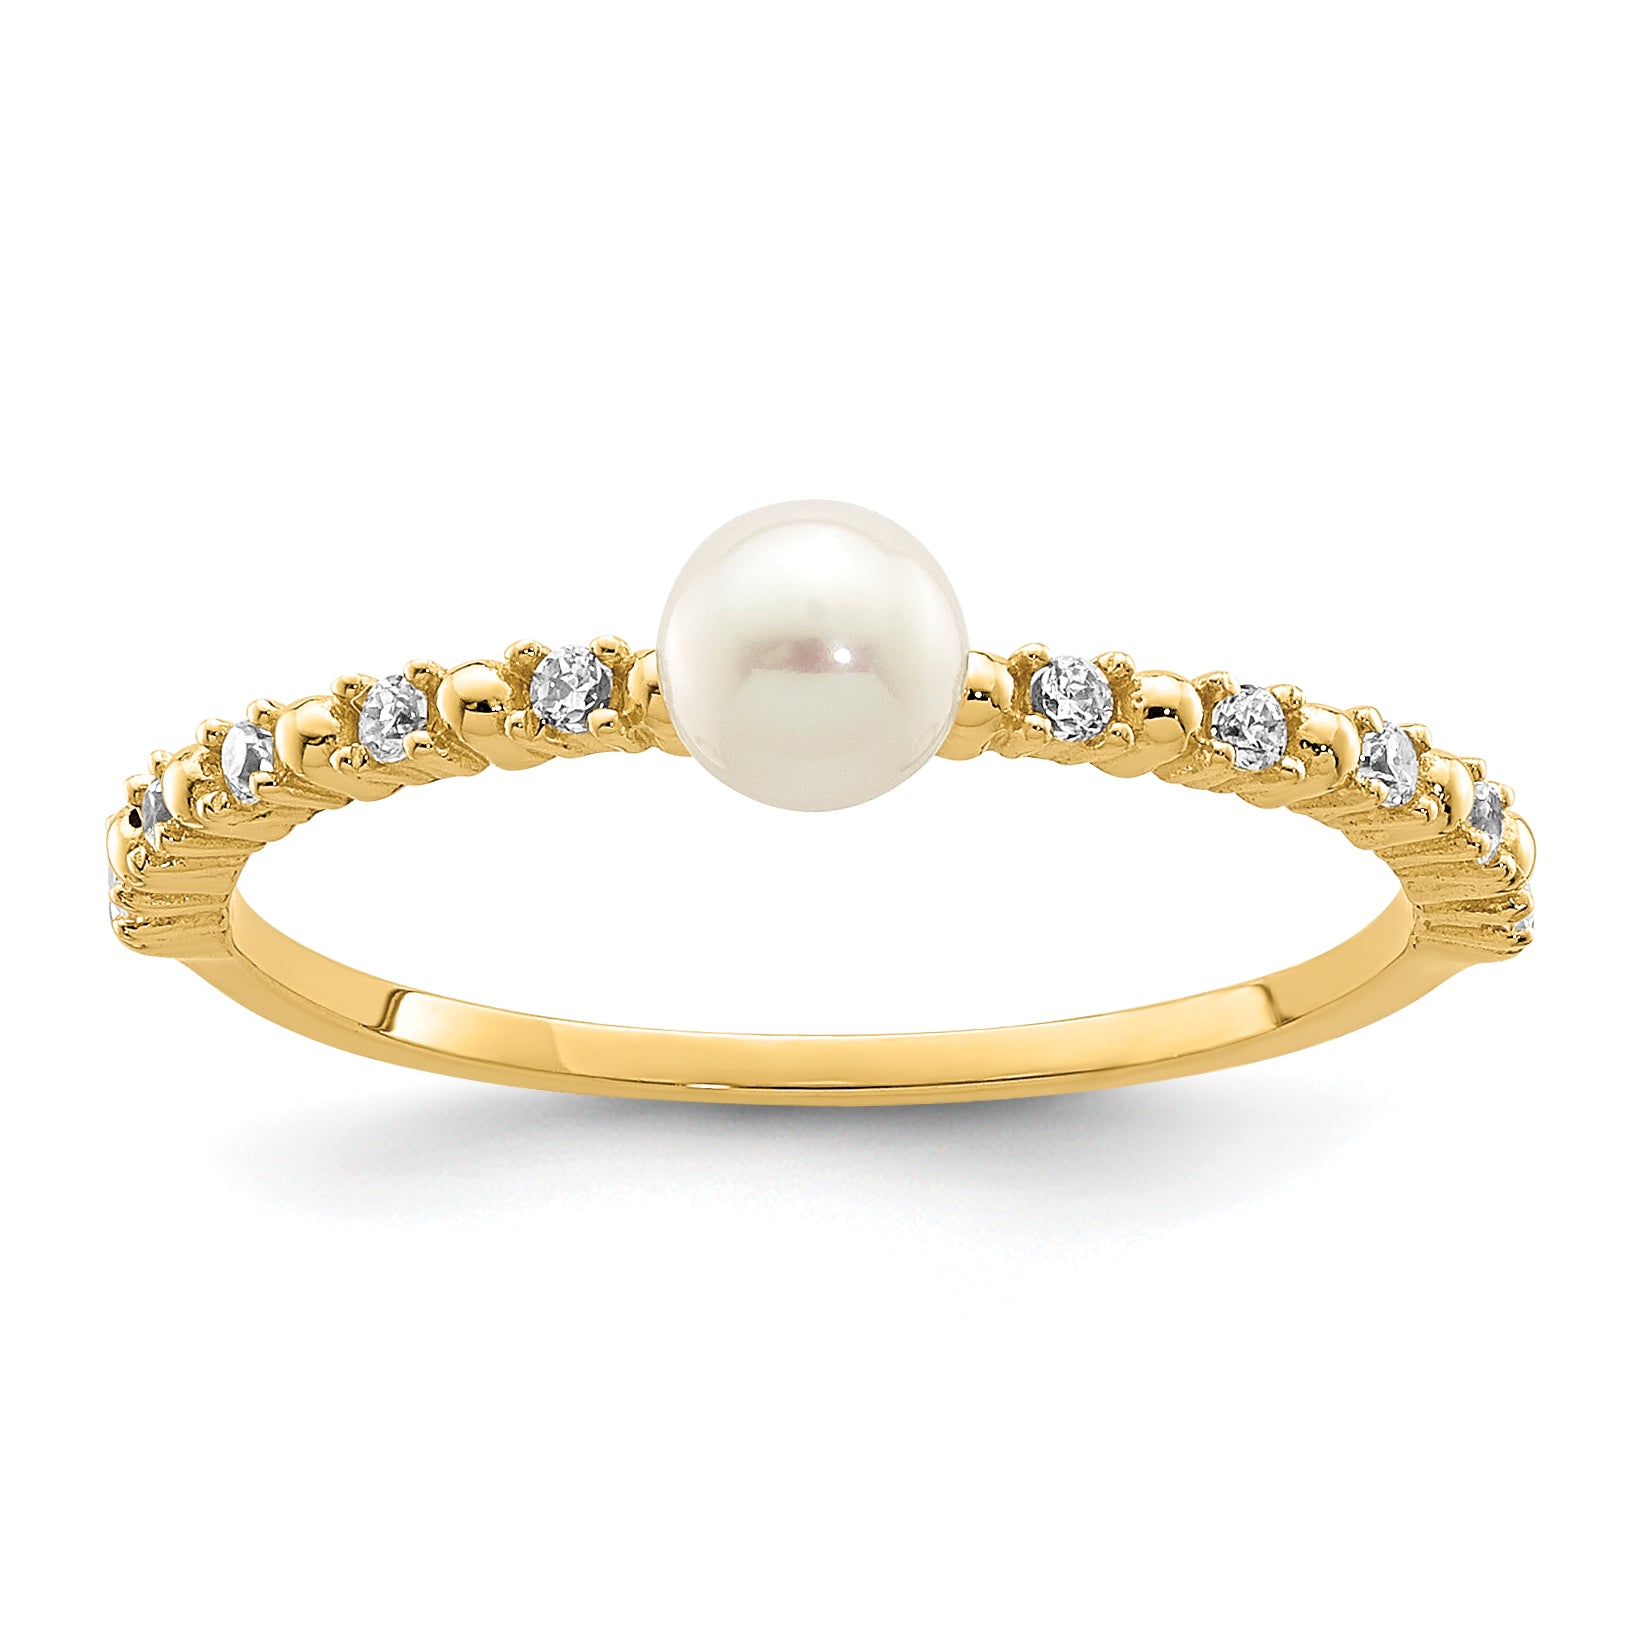 14K Madi K 3-4mm White Button Freshwater Cultured Pearl CZ Ring